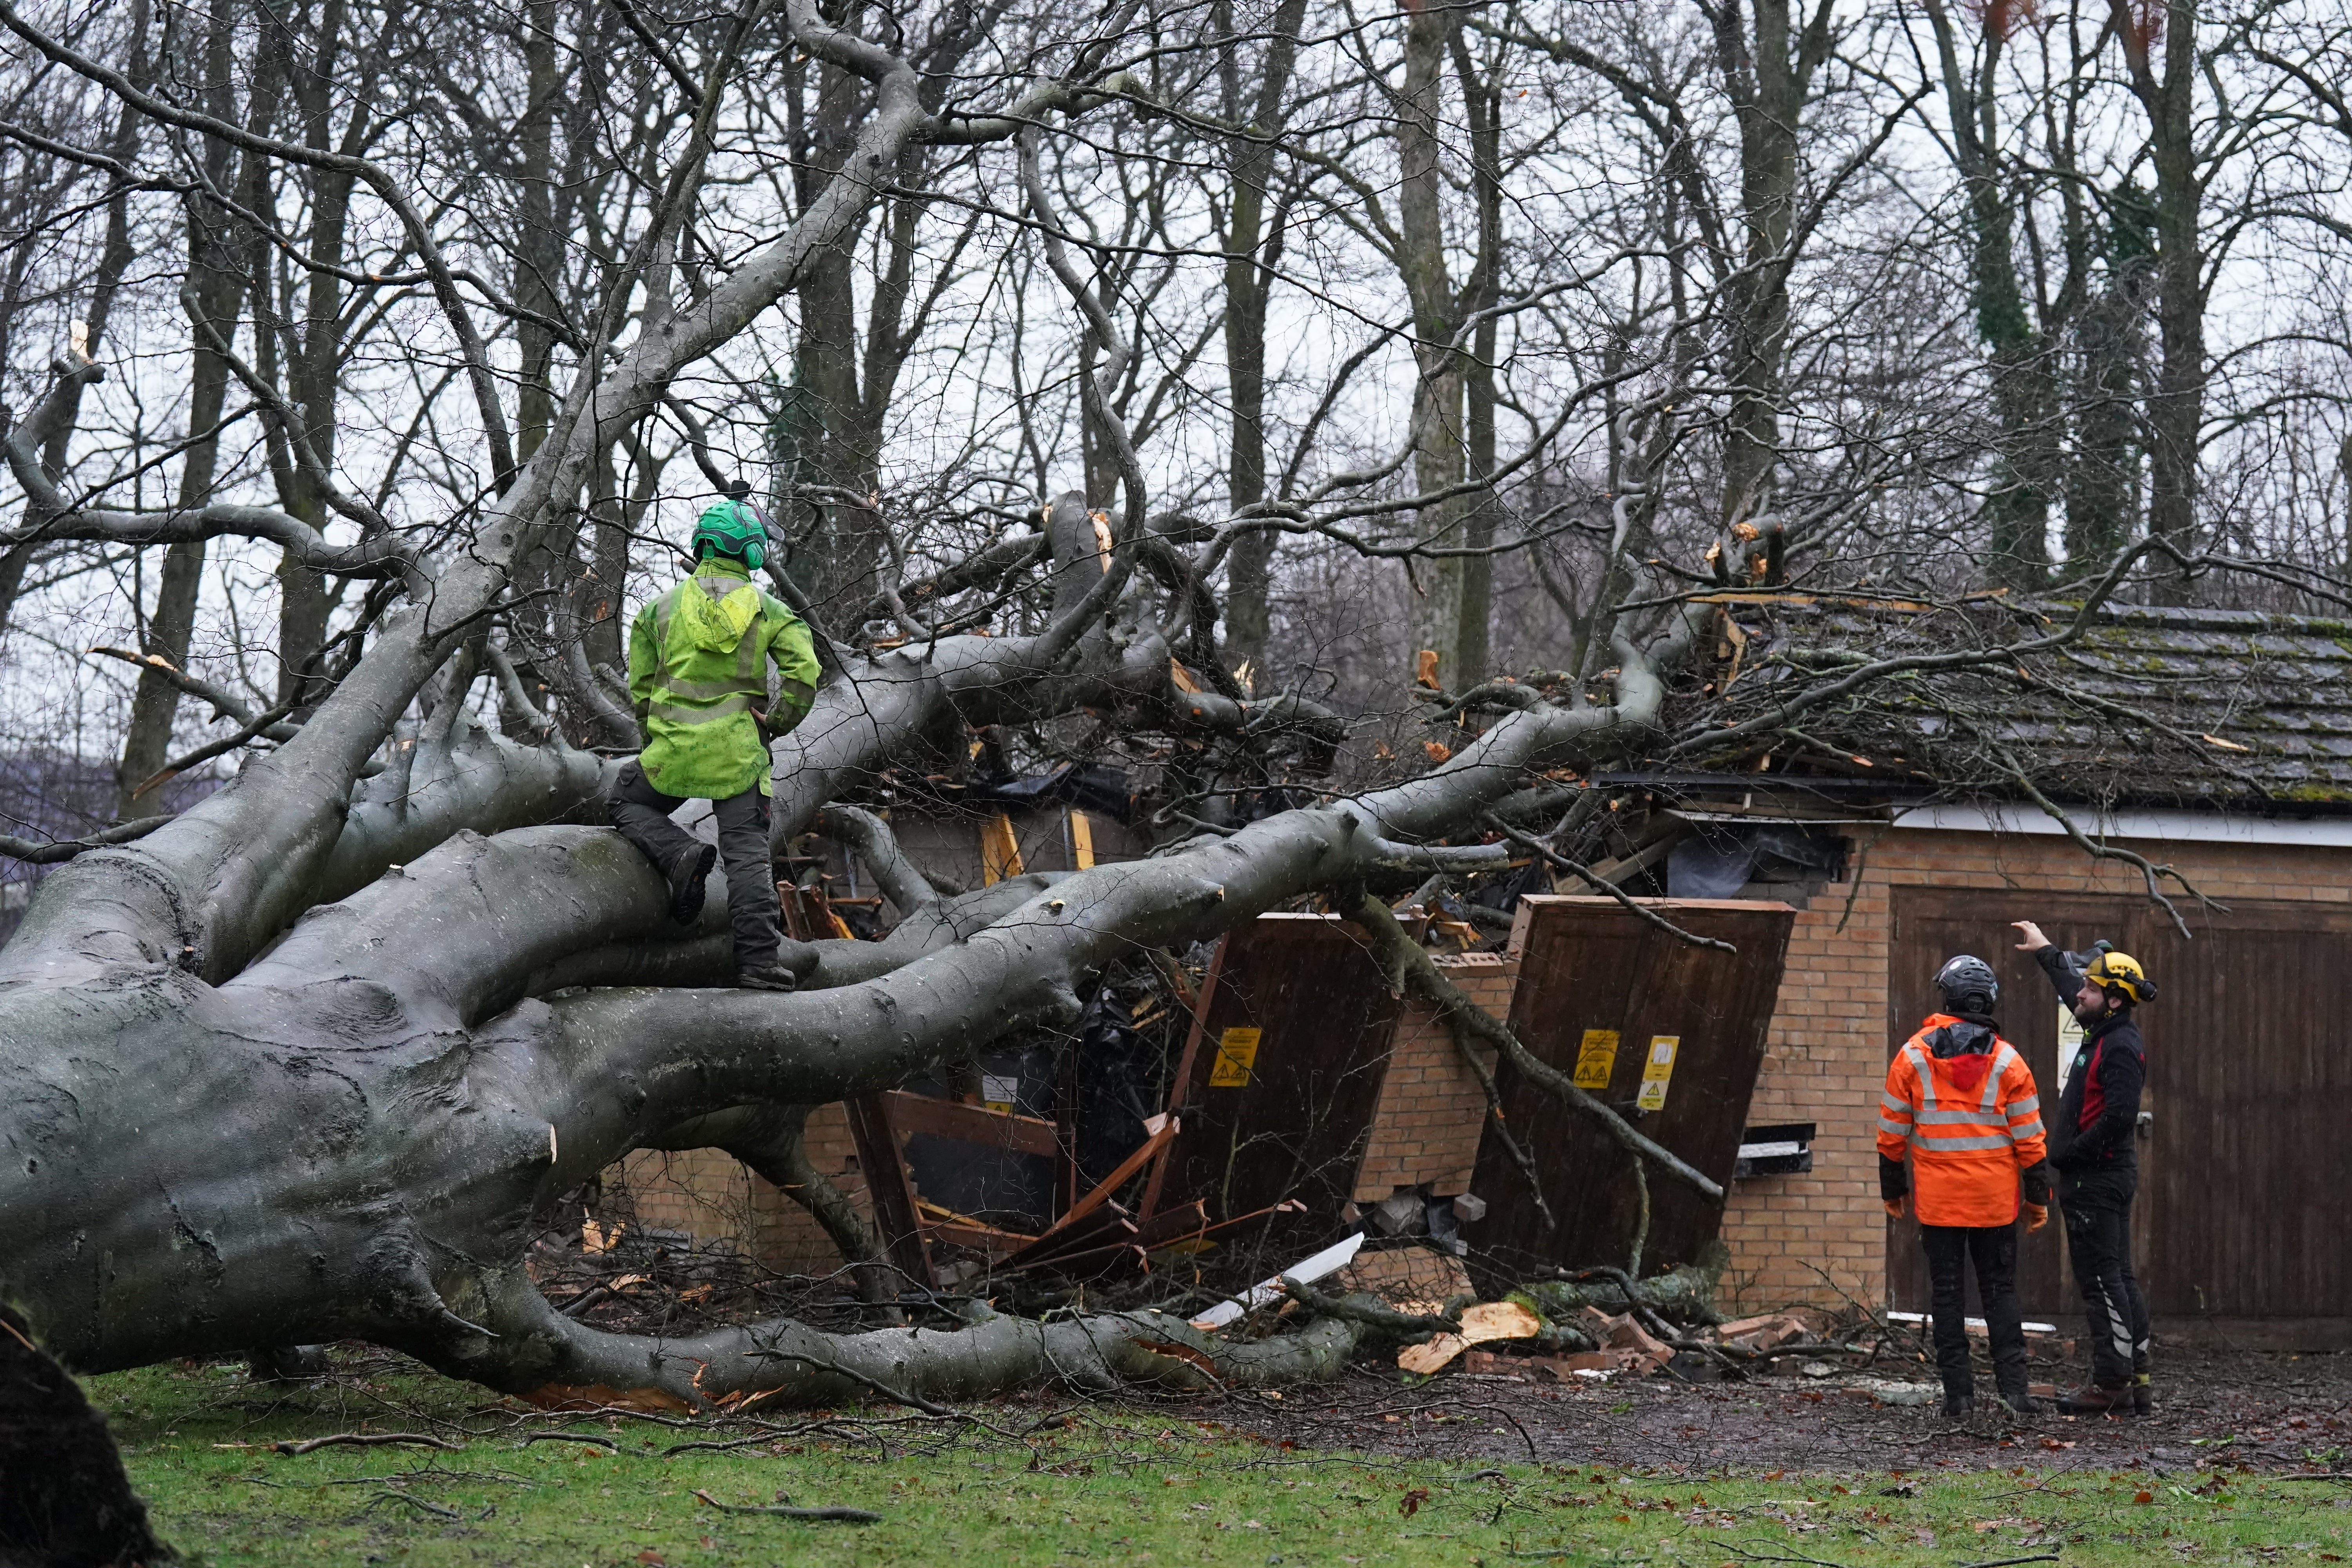 The UK is bracing for more wind and rain from Storm Jocelyn, with major disruption to transport services expected (Andrew Milligan/PA)